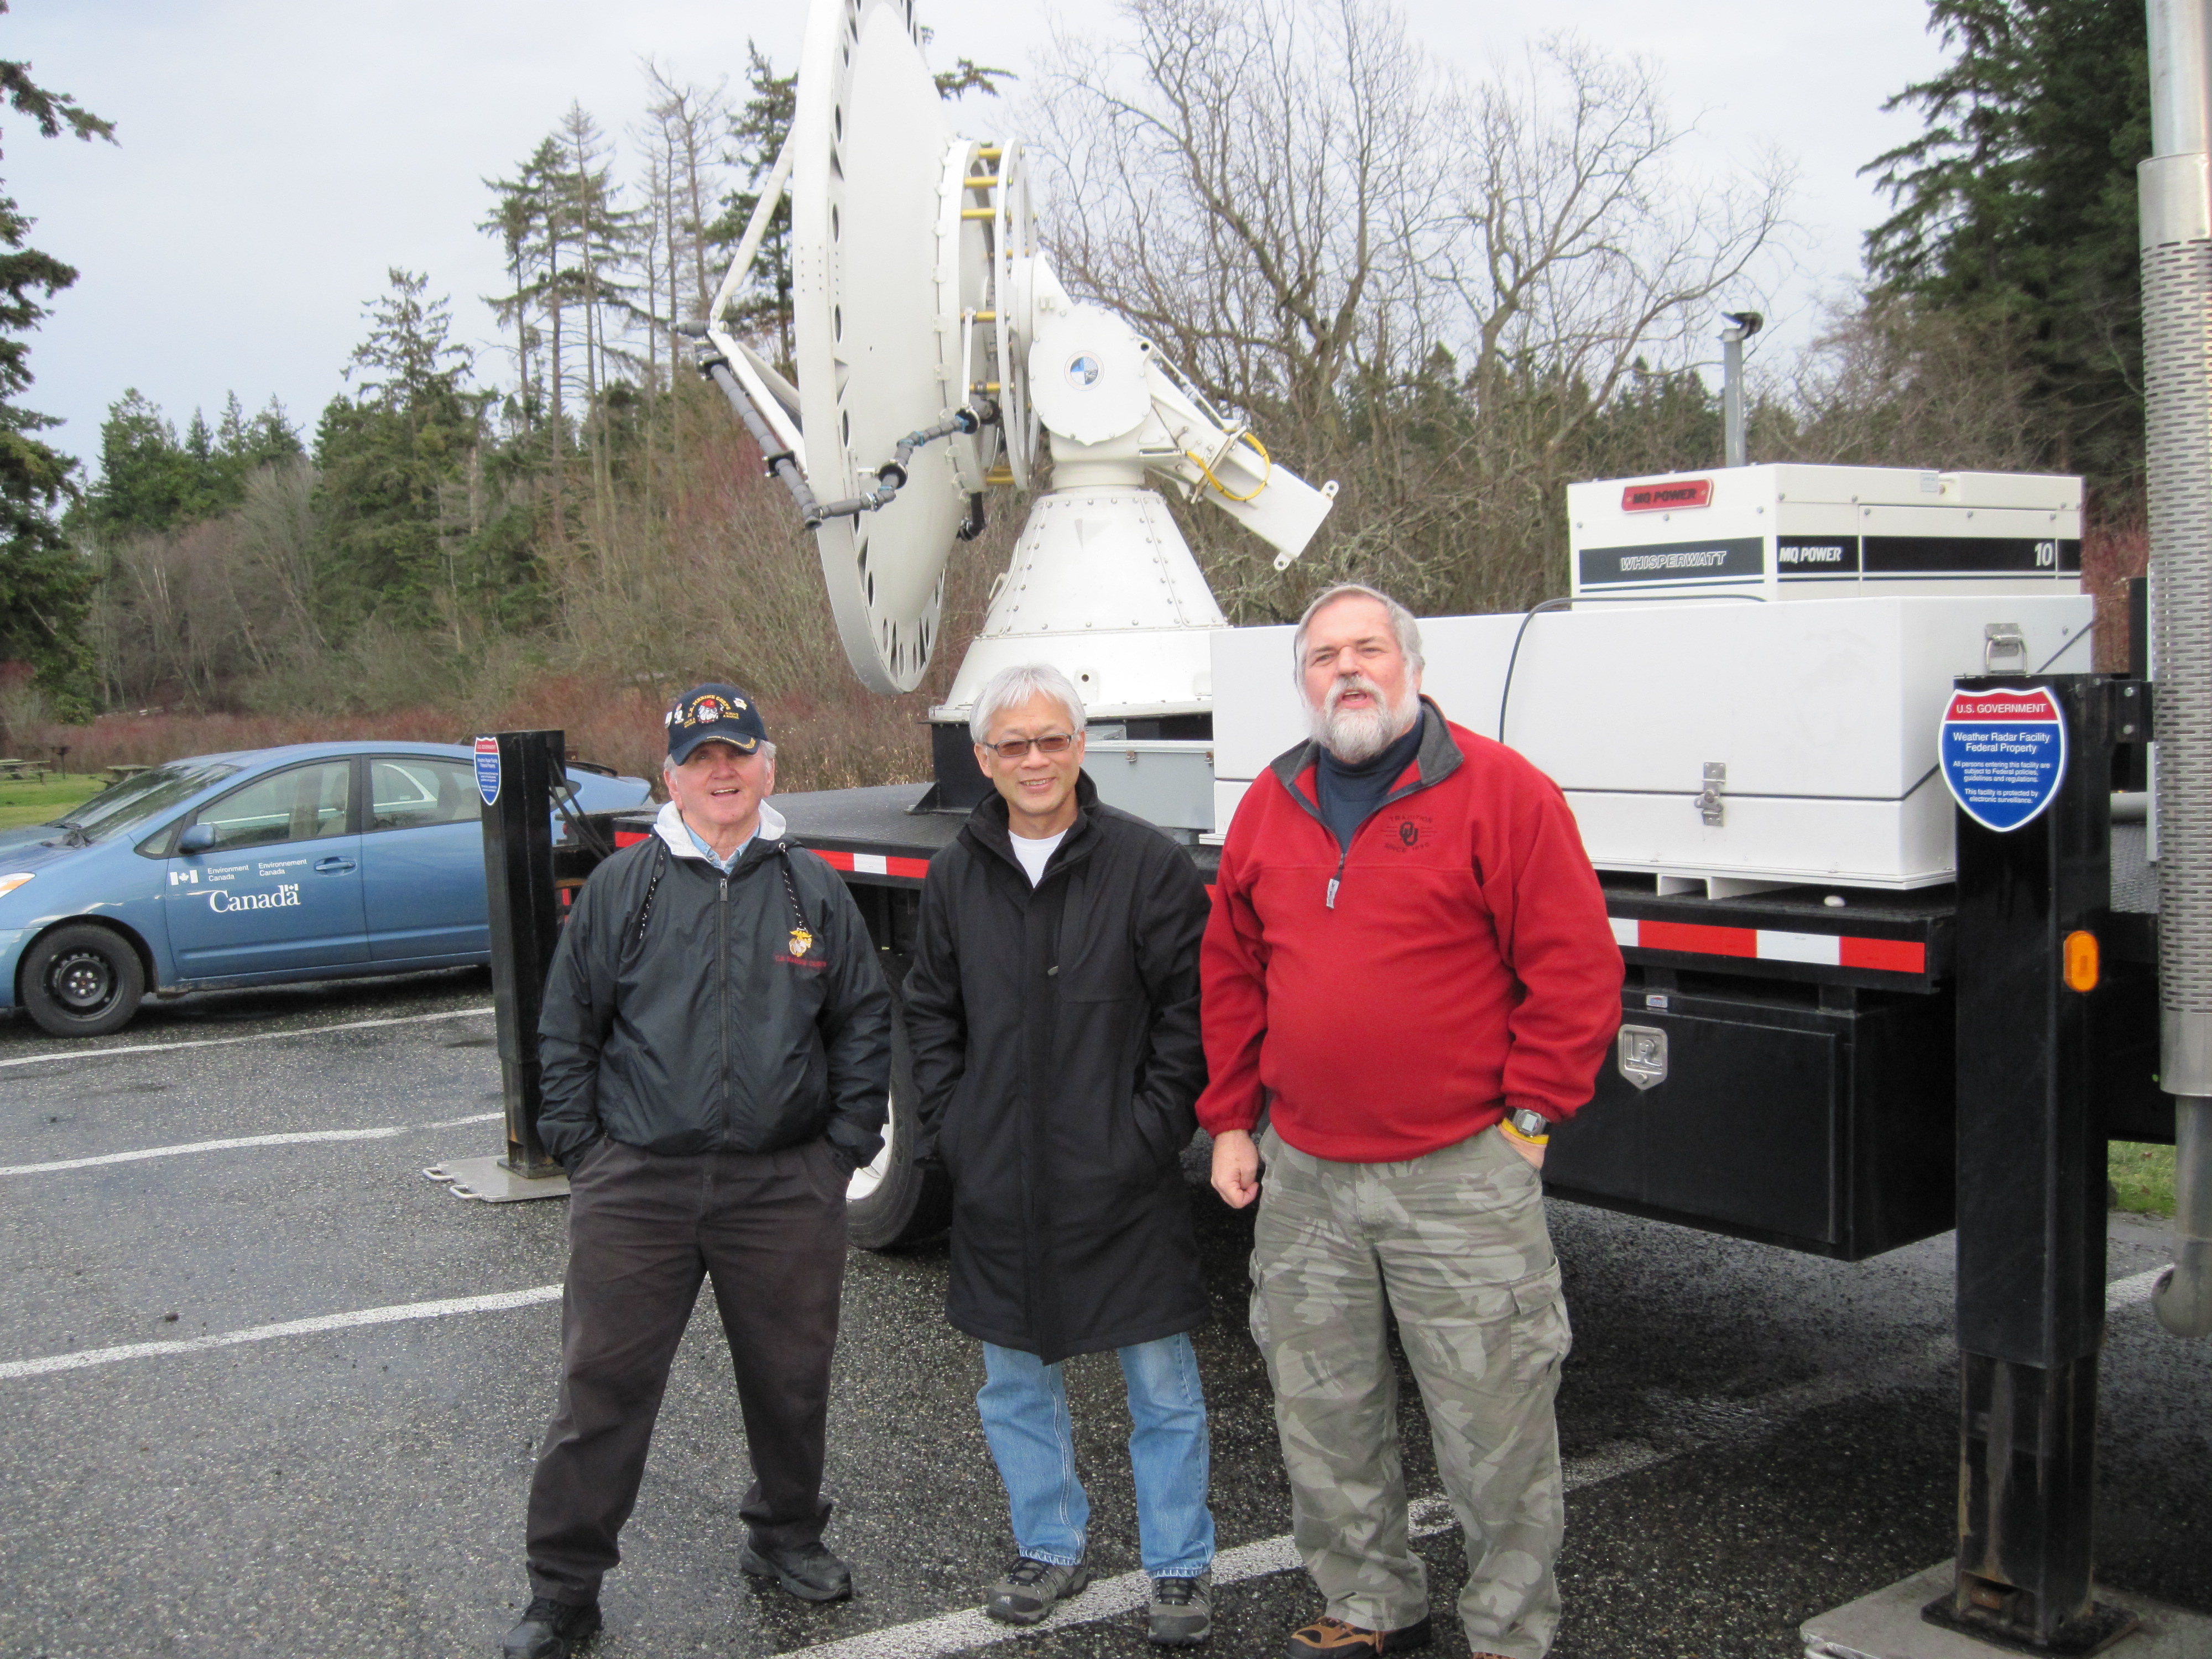 Mobile radar to assist weather nowcasting for 2010 Olympic Games